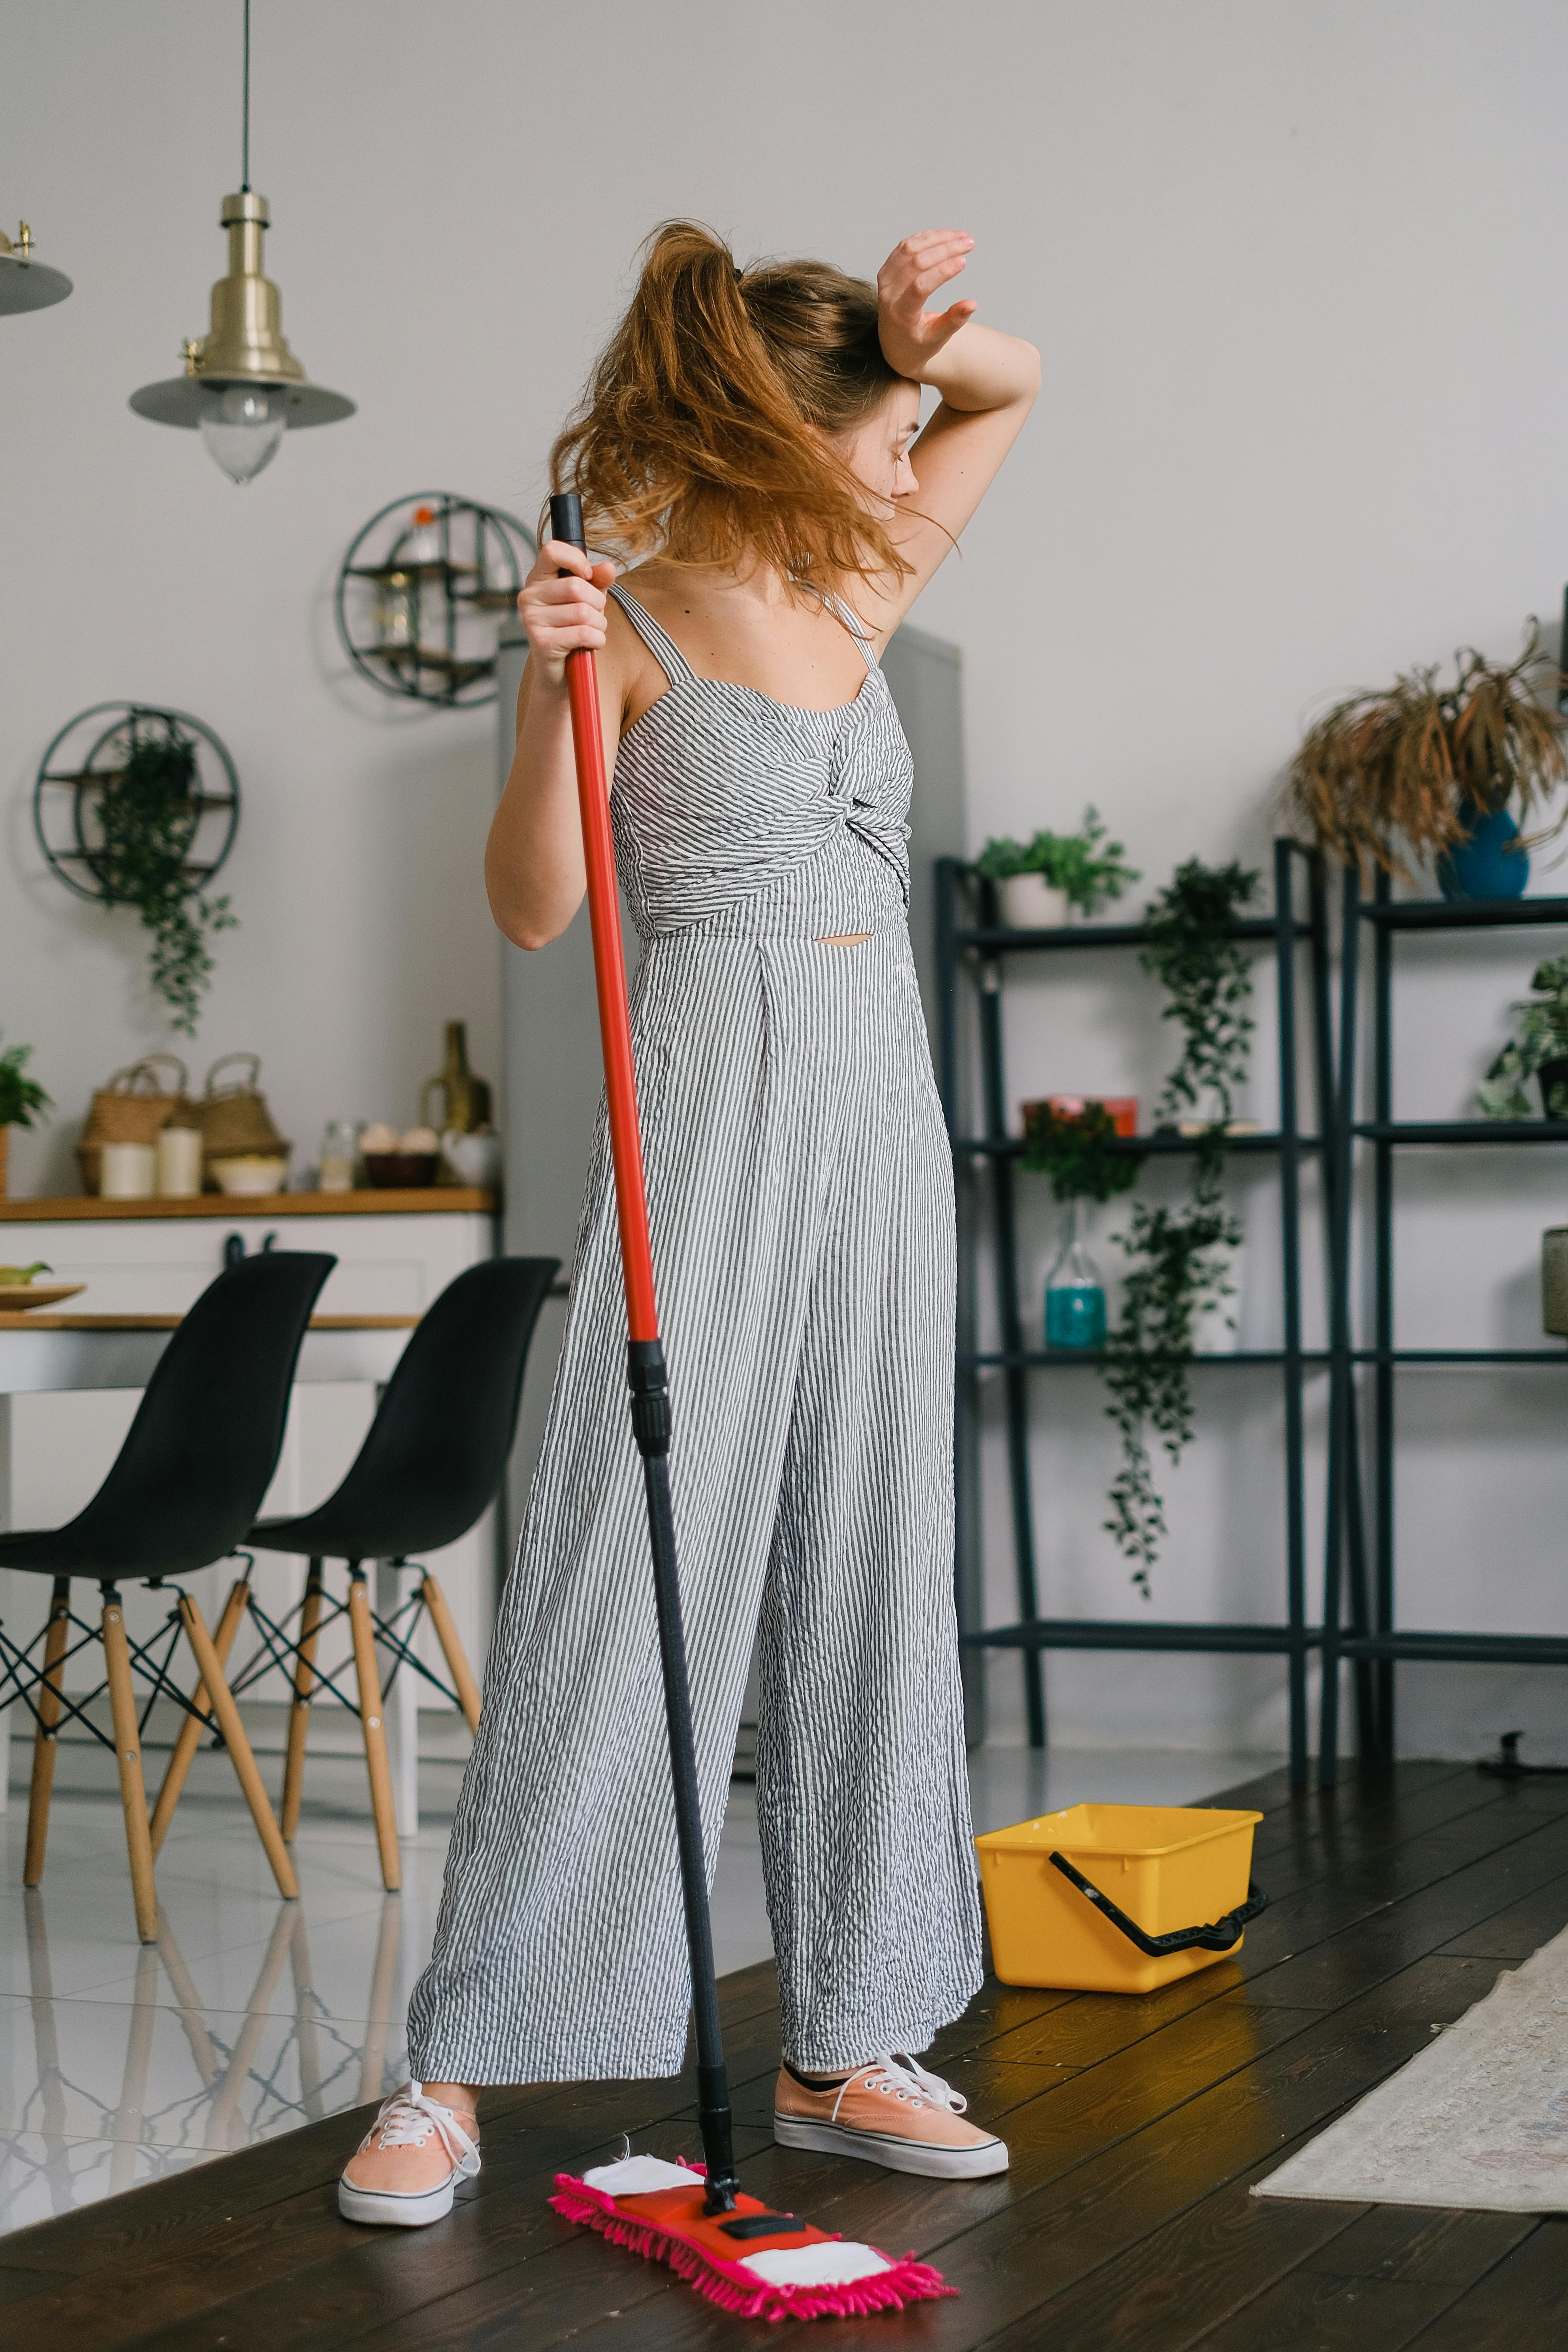 A woman cleaning the house. For illustration purposes only | Source: Pexels